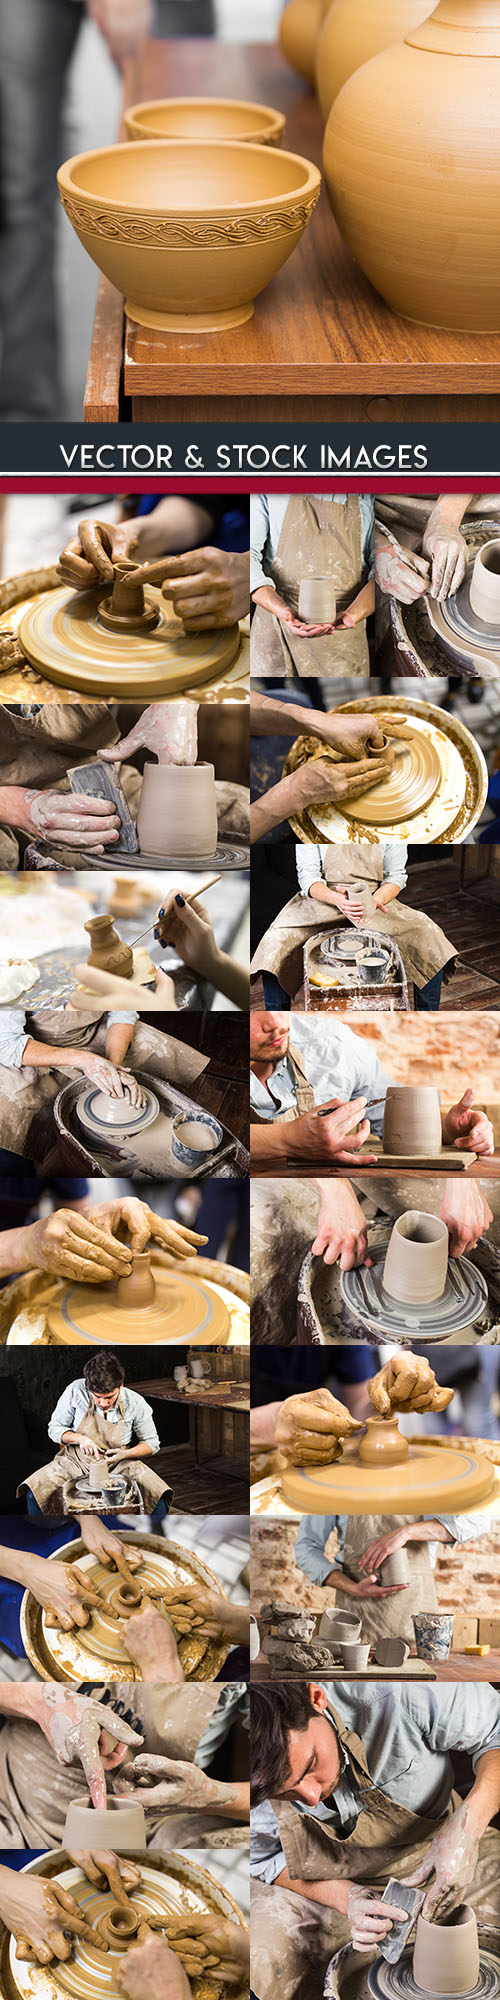 Pottery craft making ceramic pots and vases